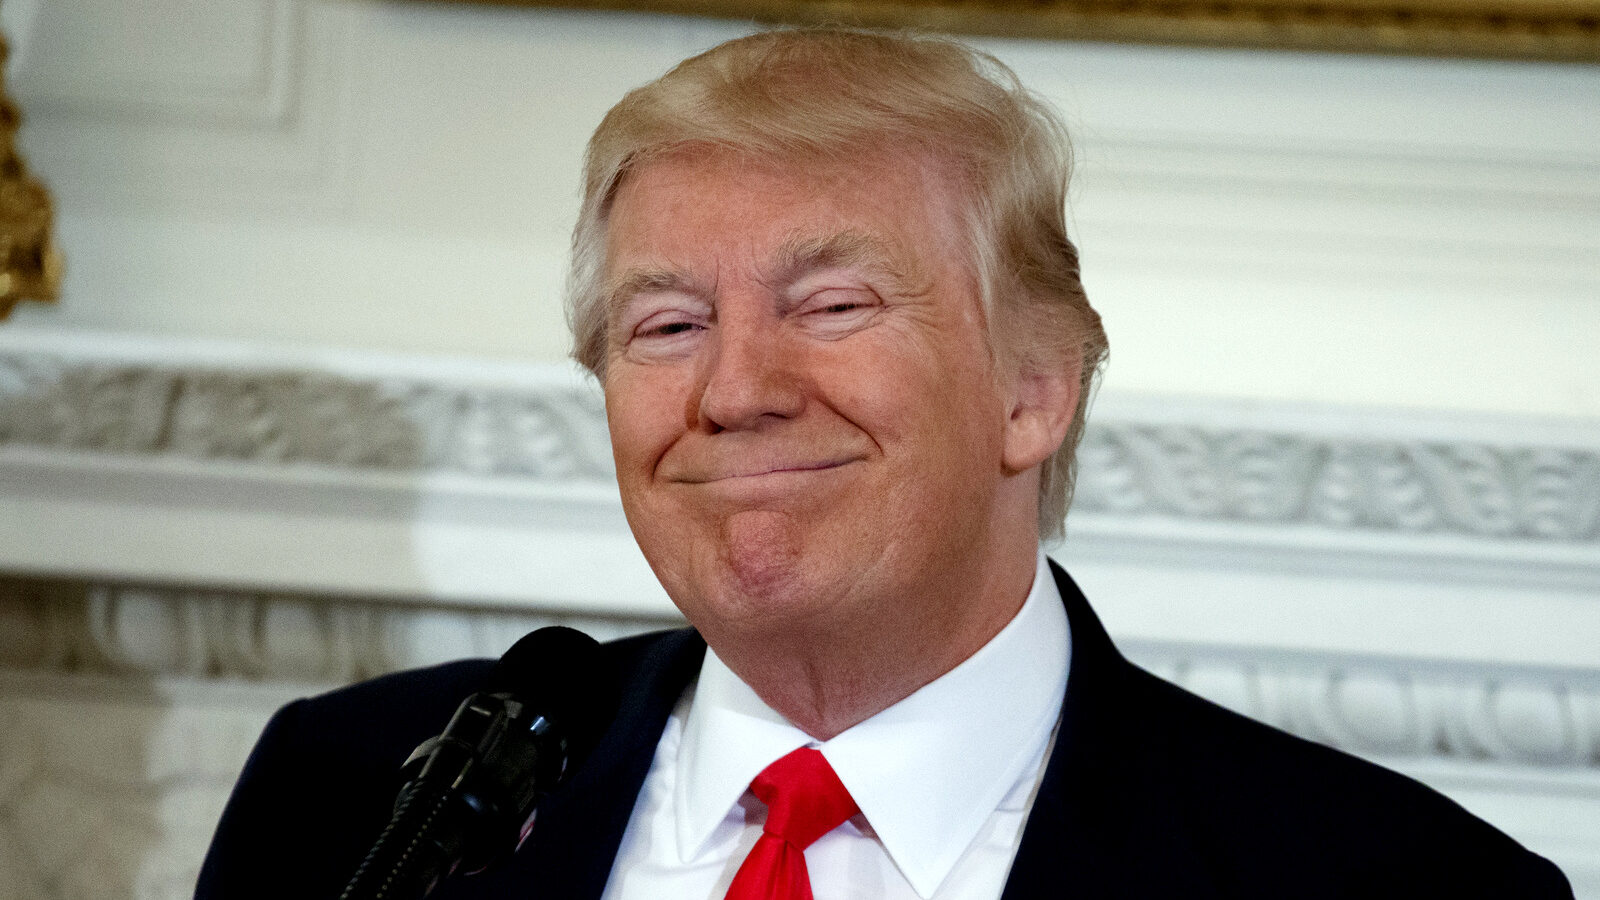 President Donald Trump smiles while speaking to a meeting of the National Governors Association, Monday, Feb. 27, 2017, at the White House in Washington. (AP/Evan Vucci)